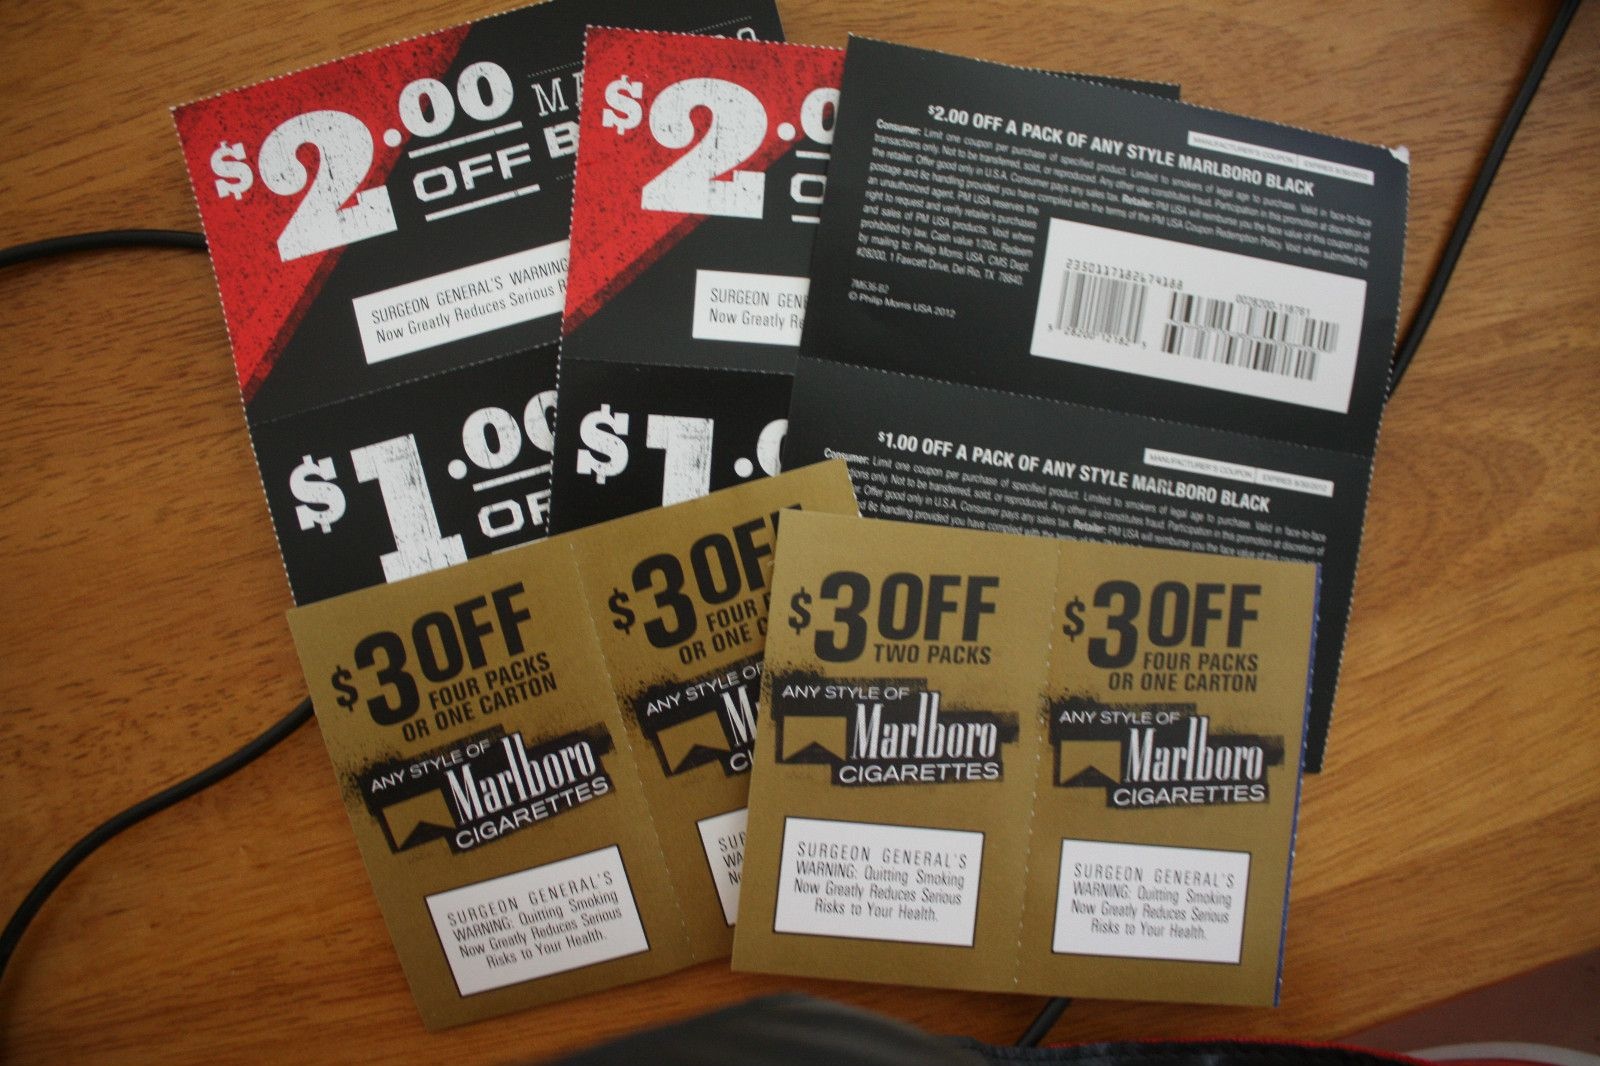 Pindraven Lee On Cigarette Coupons In 2019 | Cigarette Coupons - Free Pack Of Cigarettes Printable Coupon